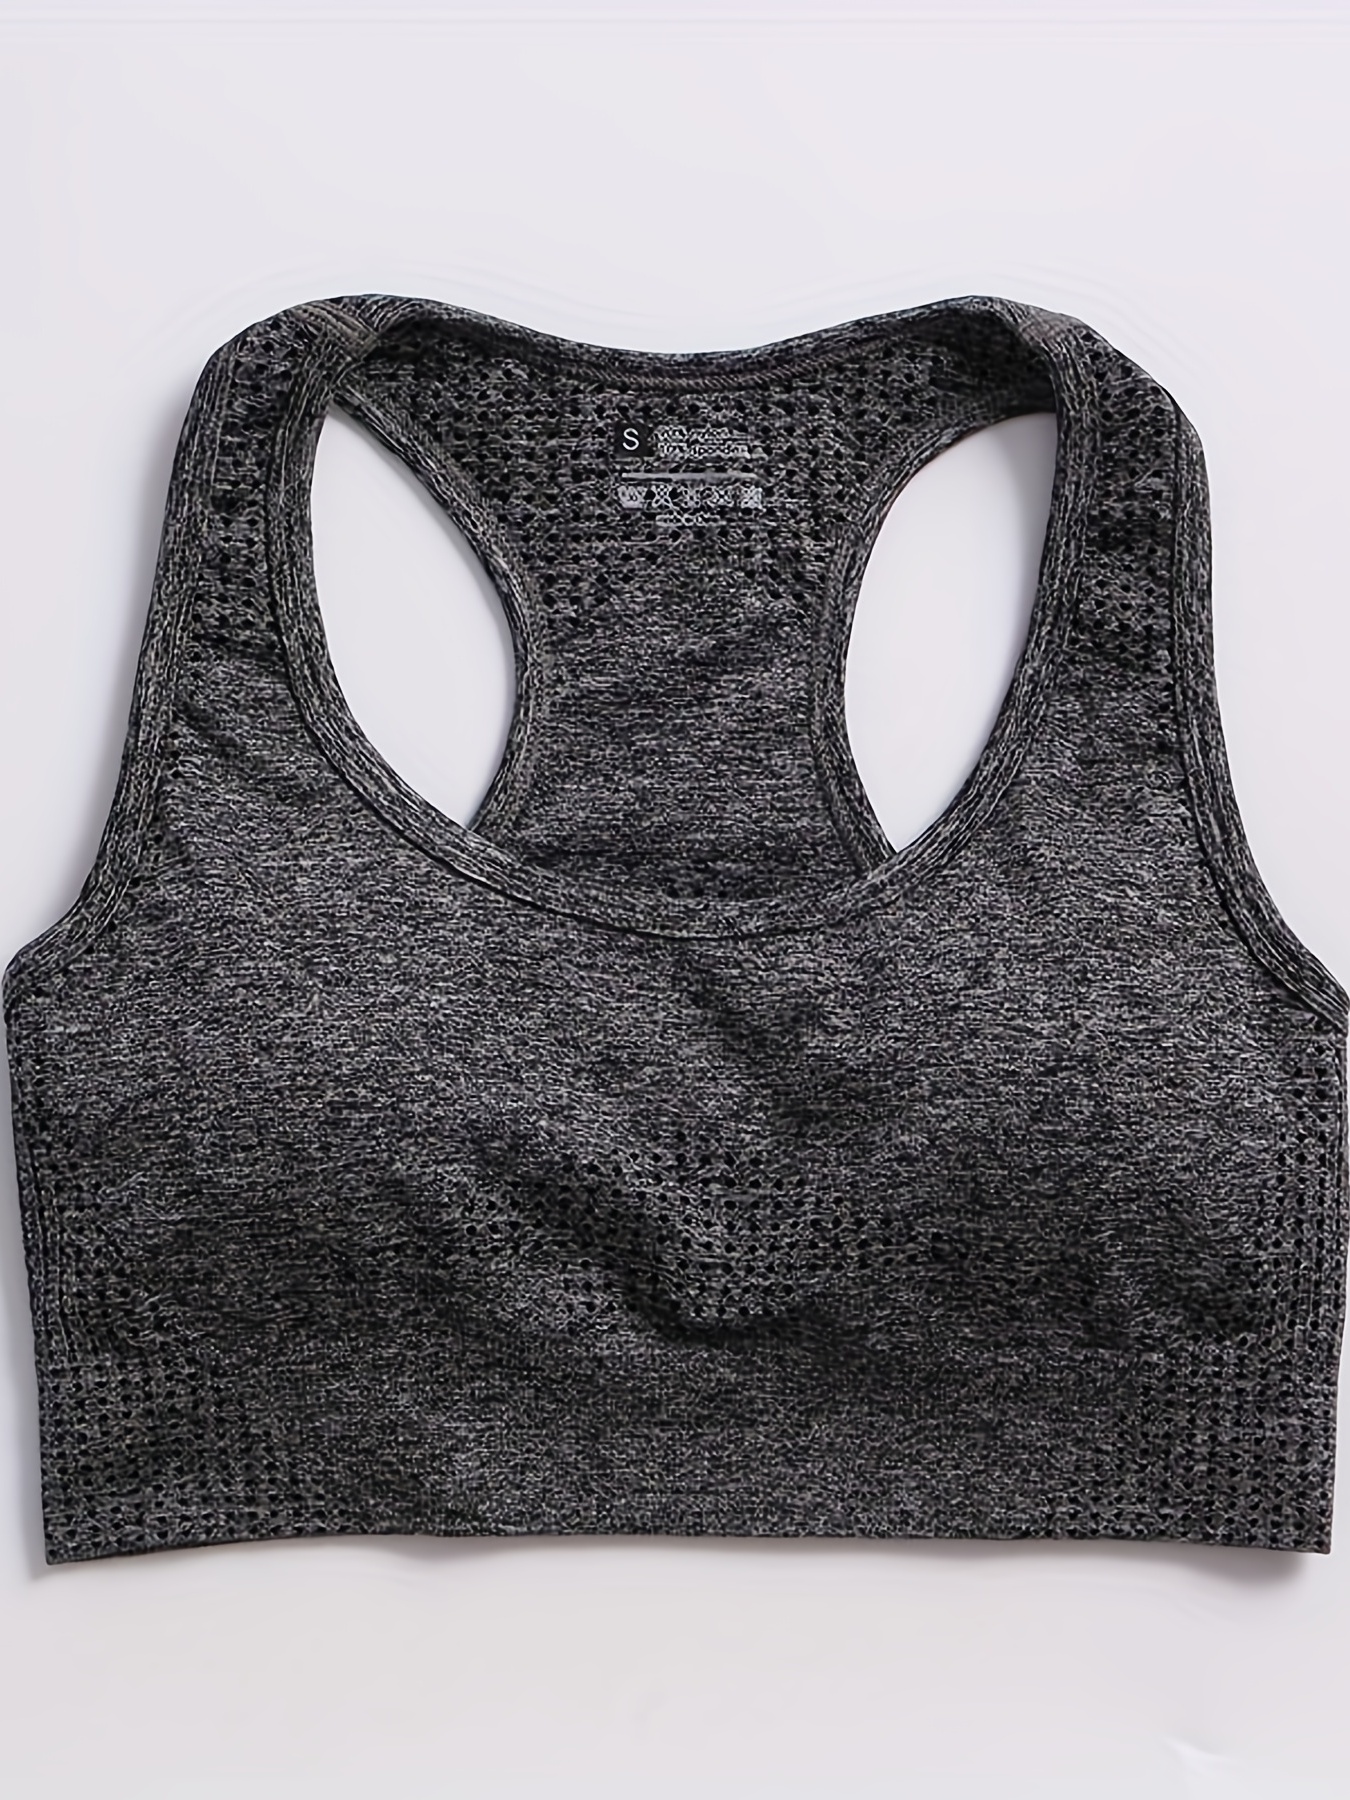 QND, Bustier, Yoga Shirts, Sports Bra for Large Breasts, Gym Vest